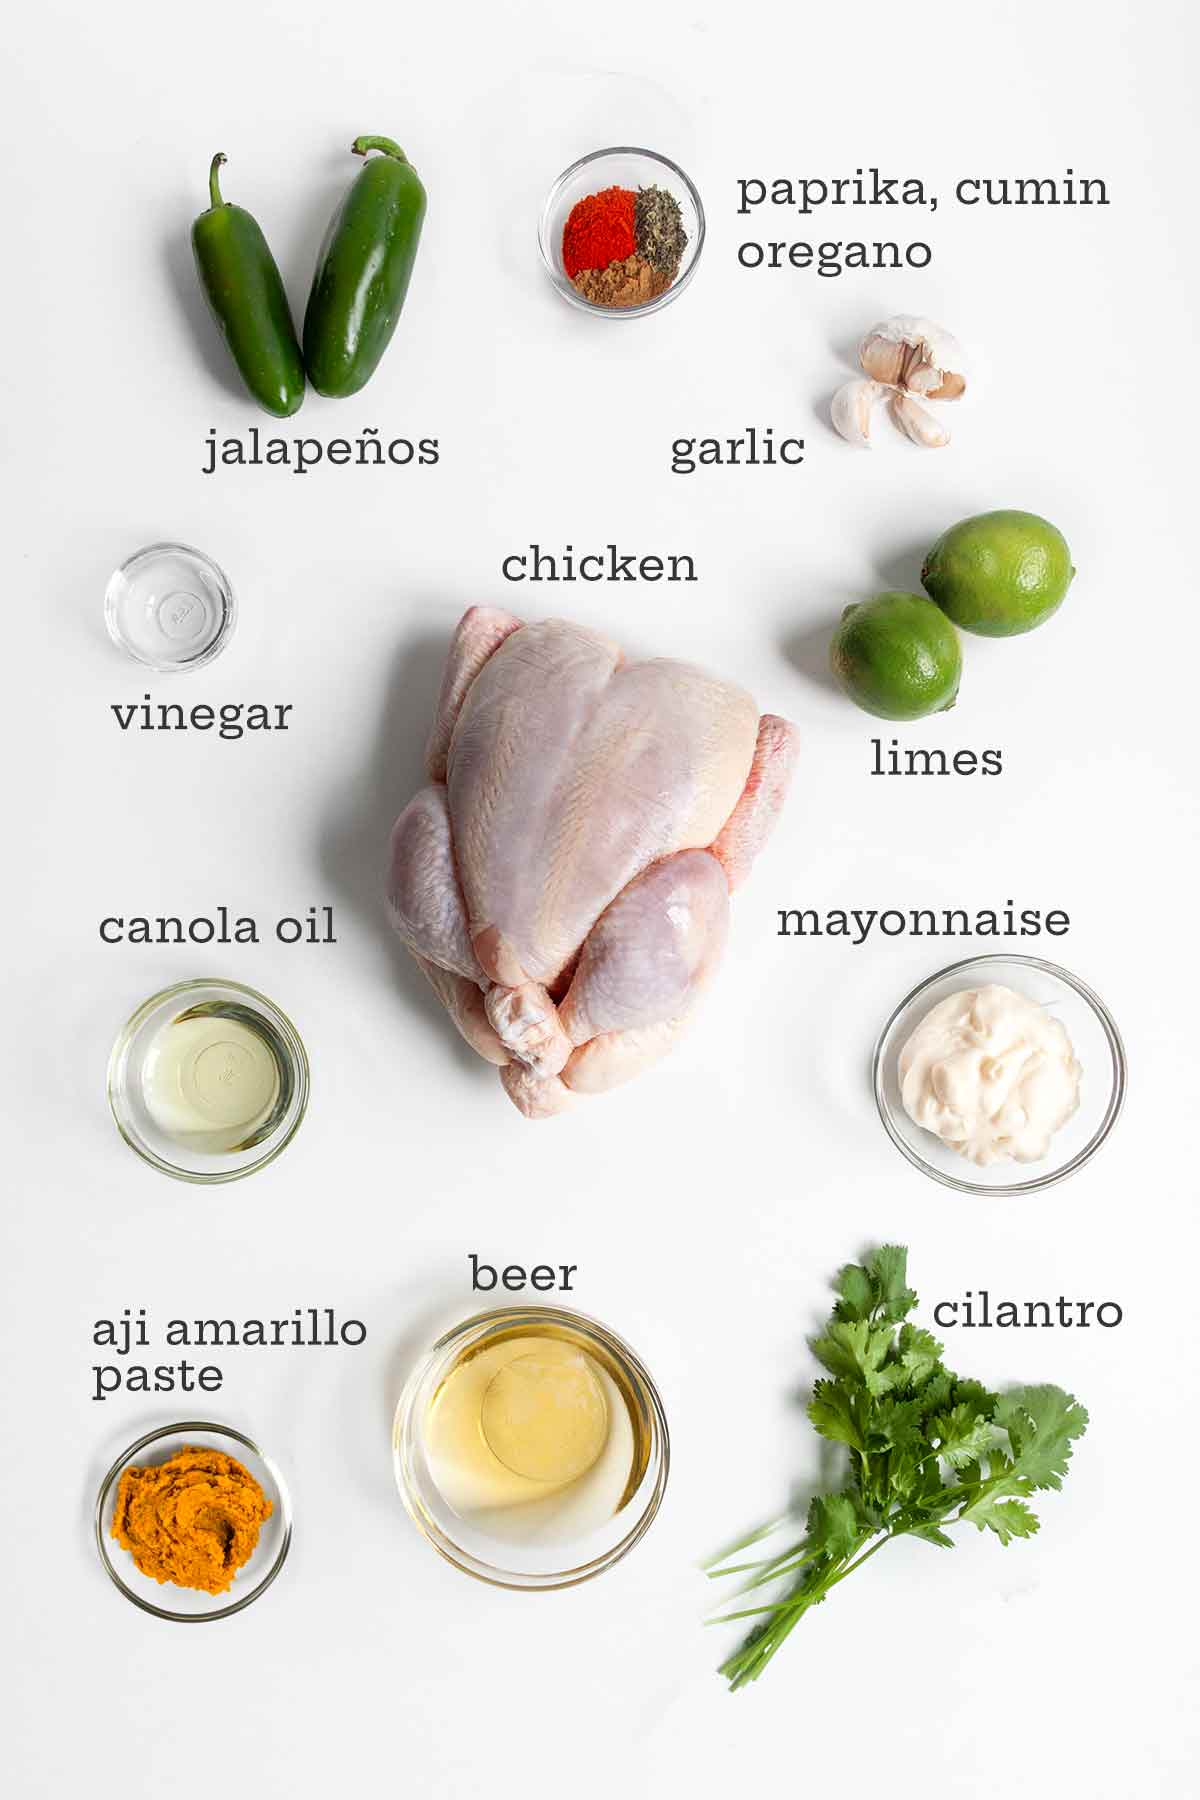 Ingredients for Peruvian chicken--whole chicken, spices, limes, mayo, oil, beer, garlic, vinegar, jalapenos, and cilantro.